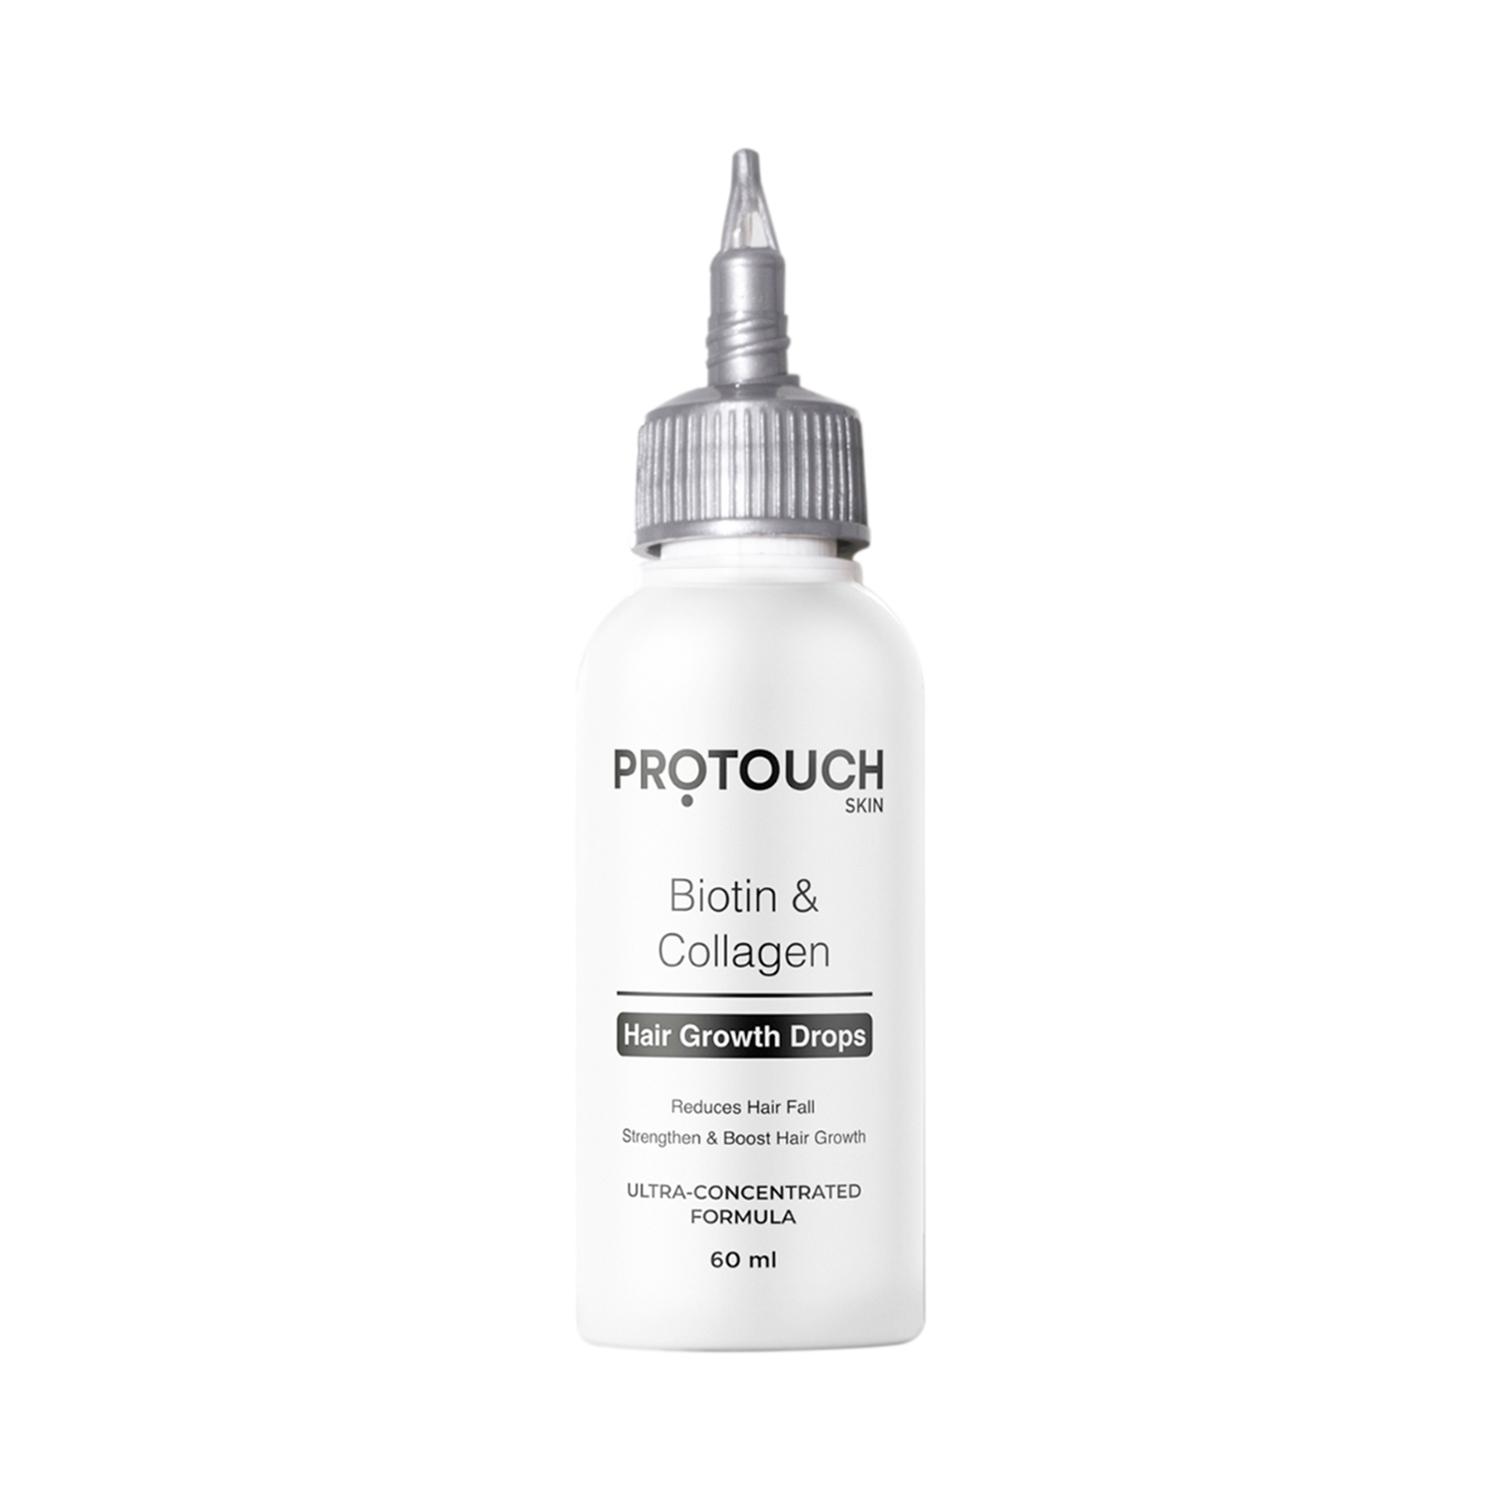 Protouch | Protouch Biotin & Collagen Hair Growth Drops (60ml)